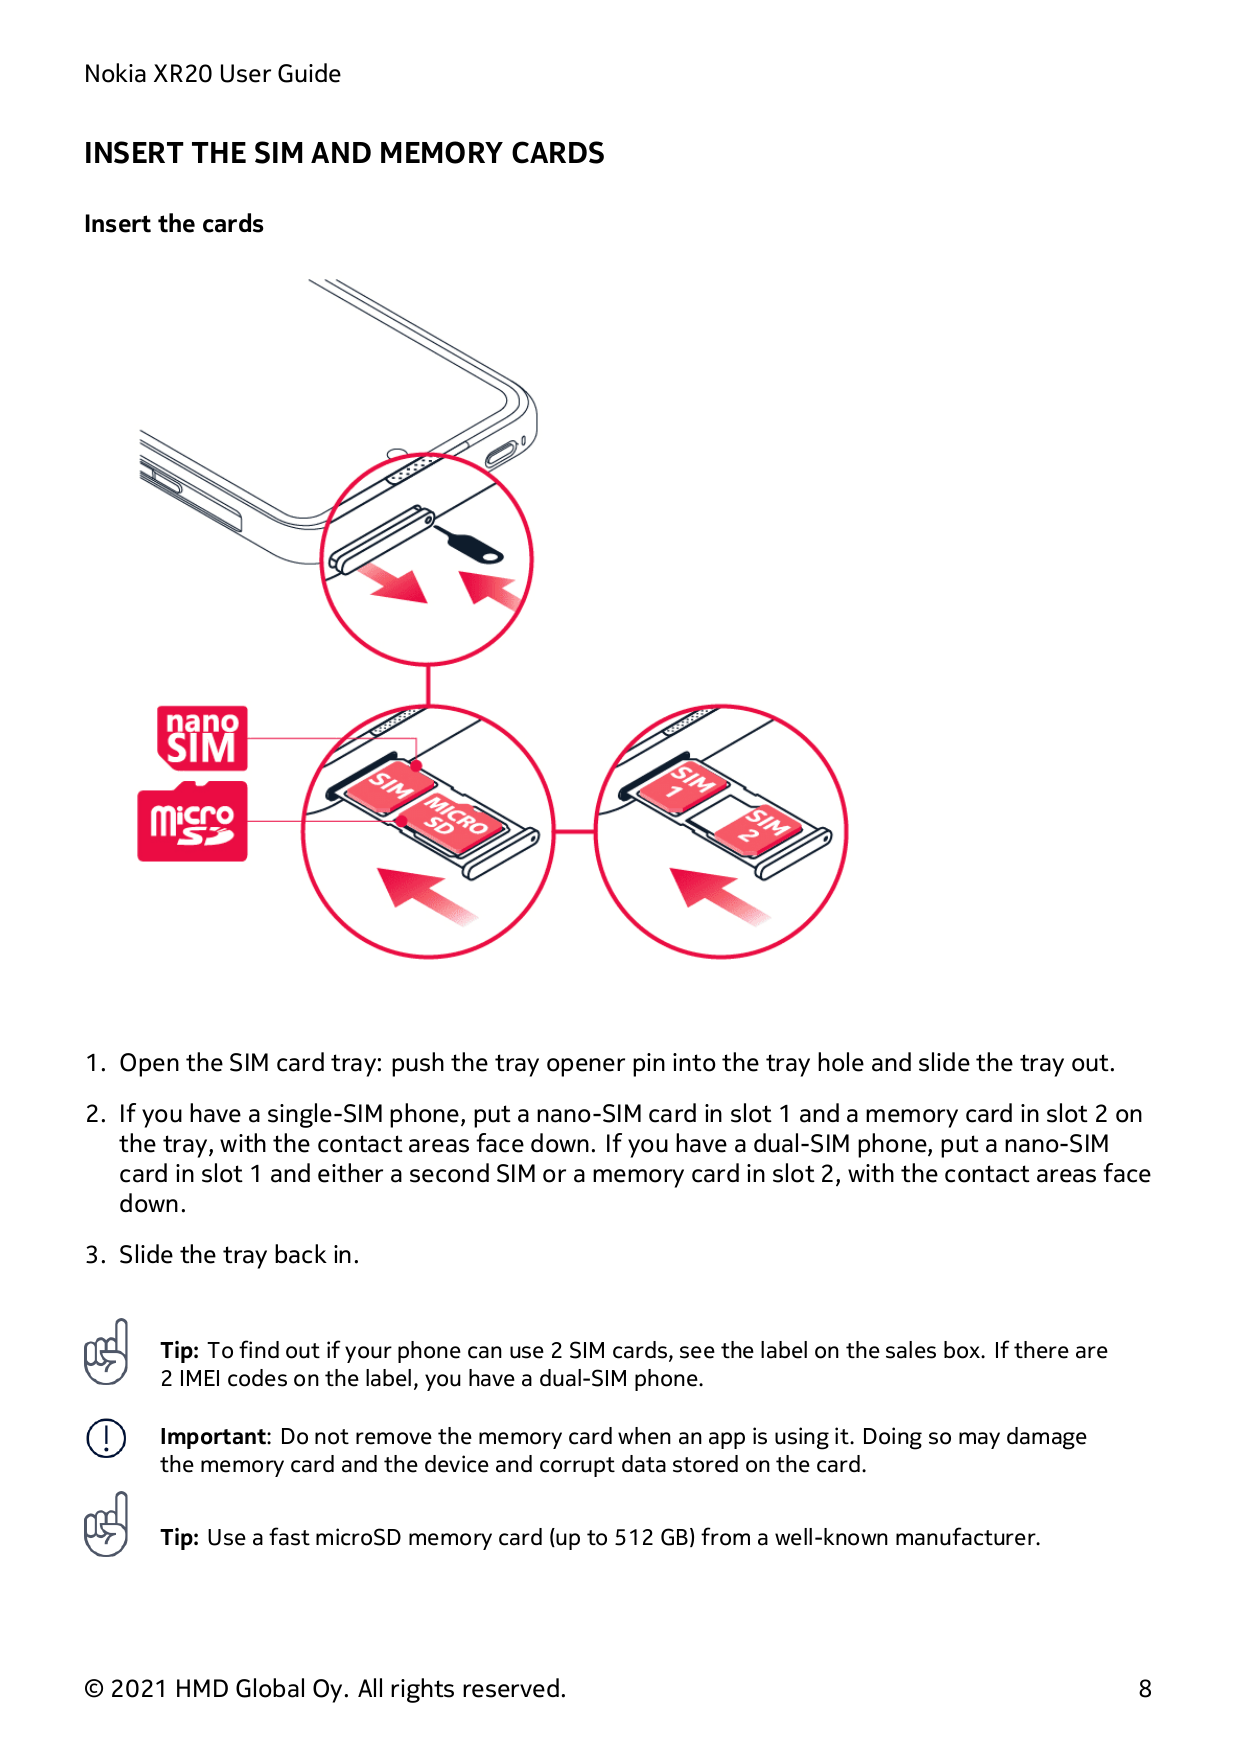 Nokia XR20 User GuideINSERT THE SIM AND MEMORY CARDSInsert the cards1. Open the SIM card tray: push the tray opener pin into the